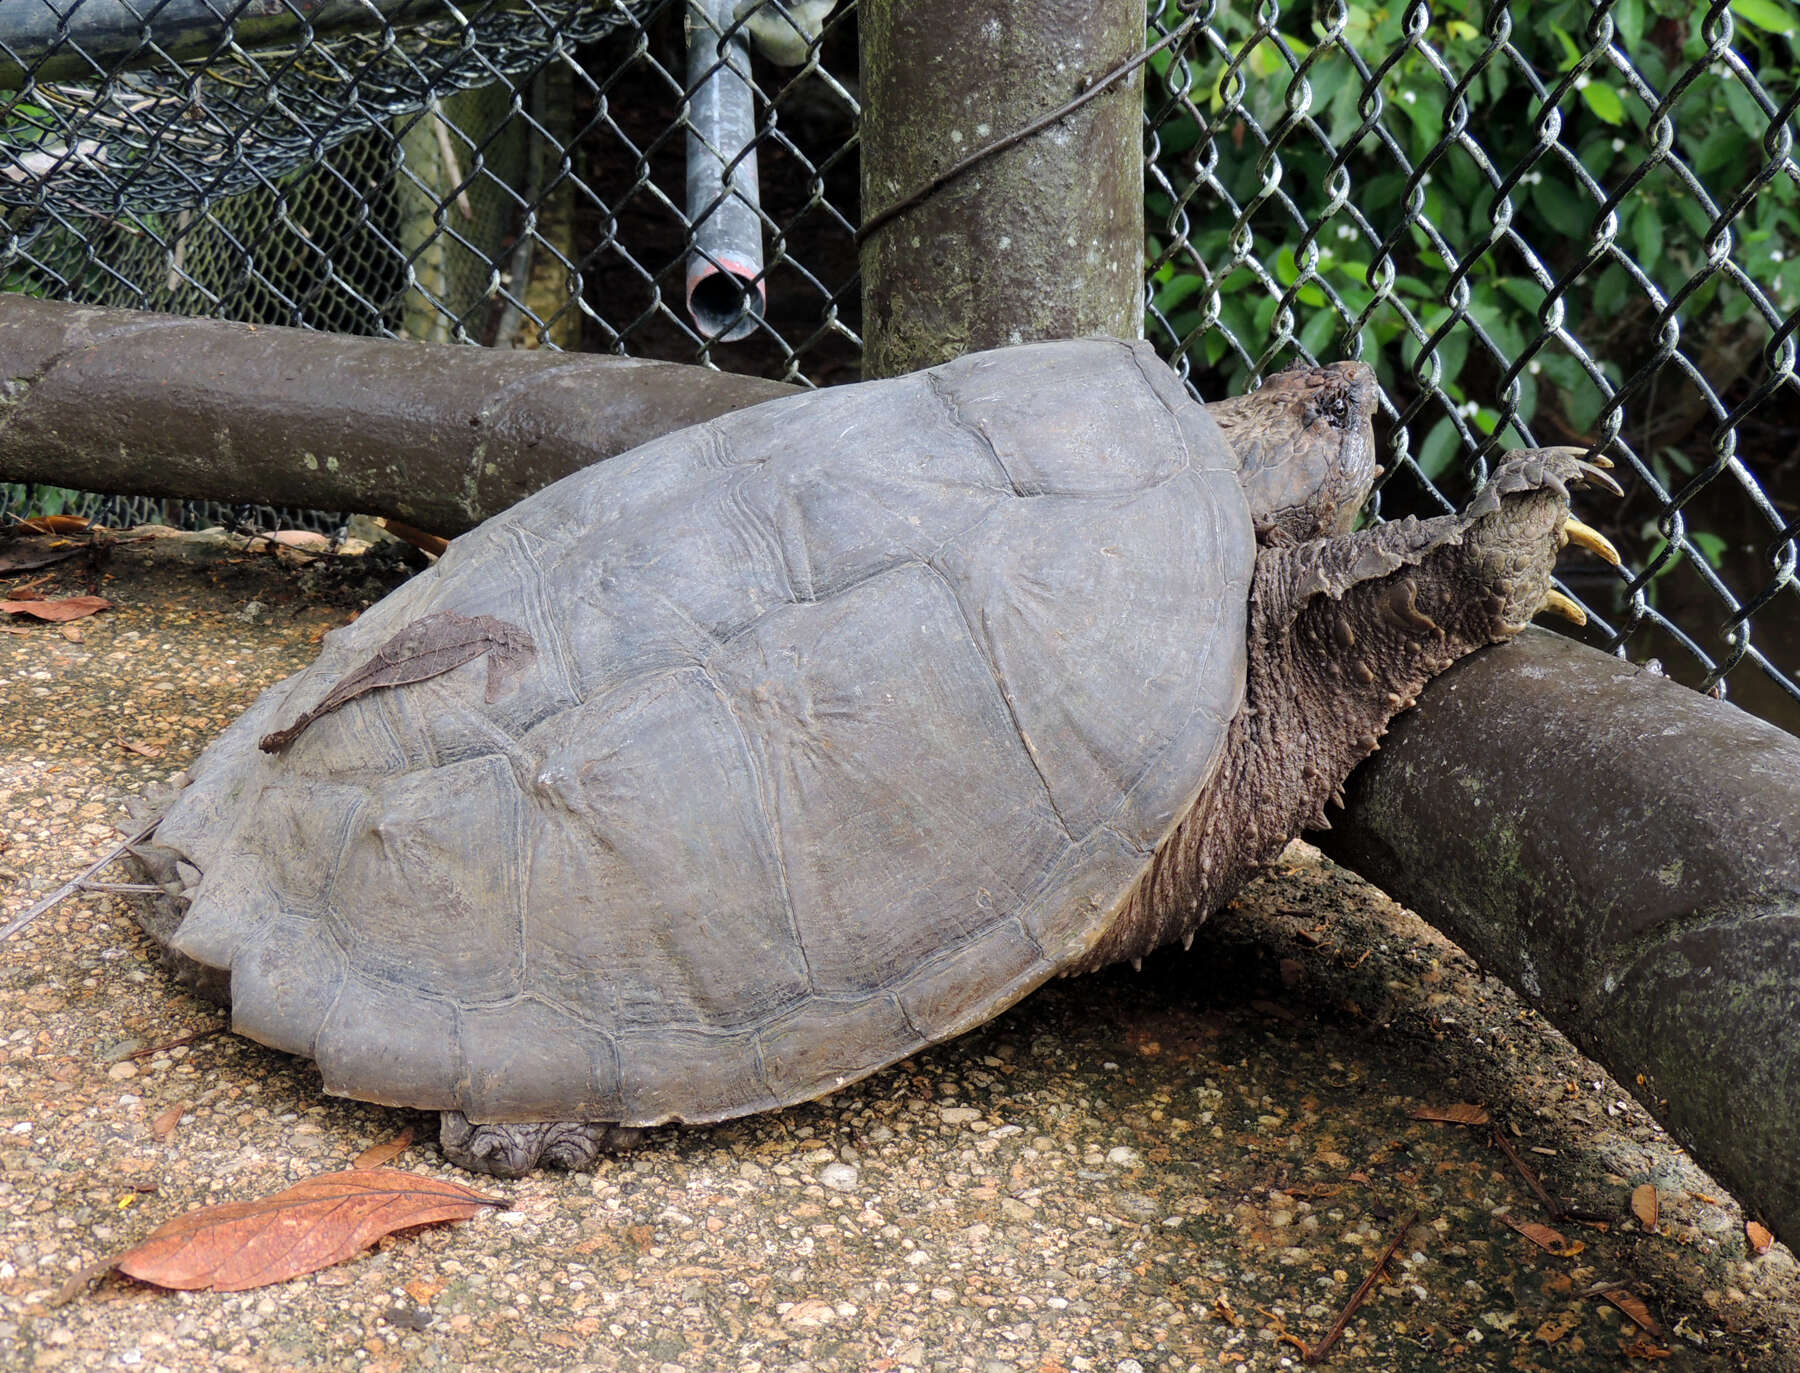 Image of Yucatán Snapping Turtle